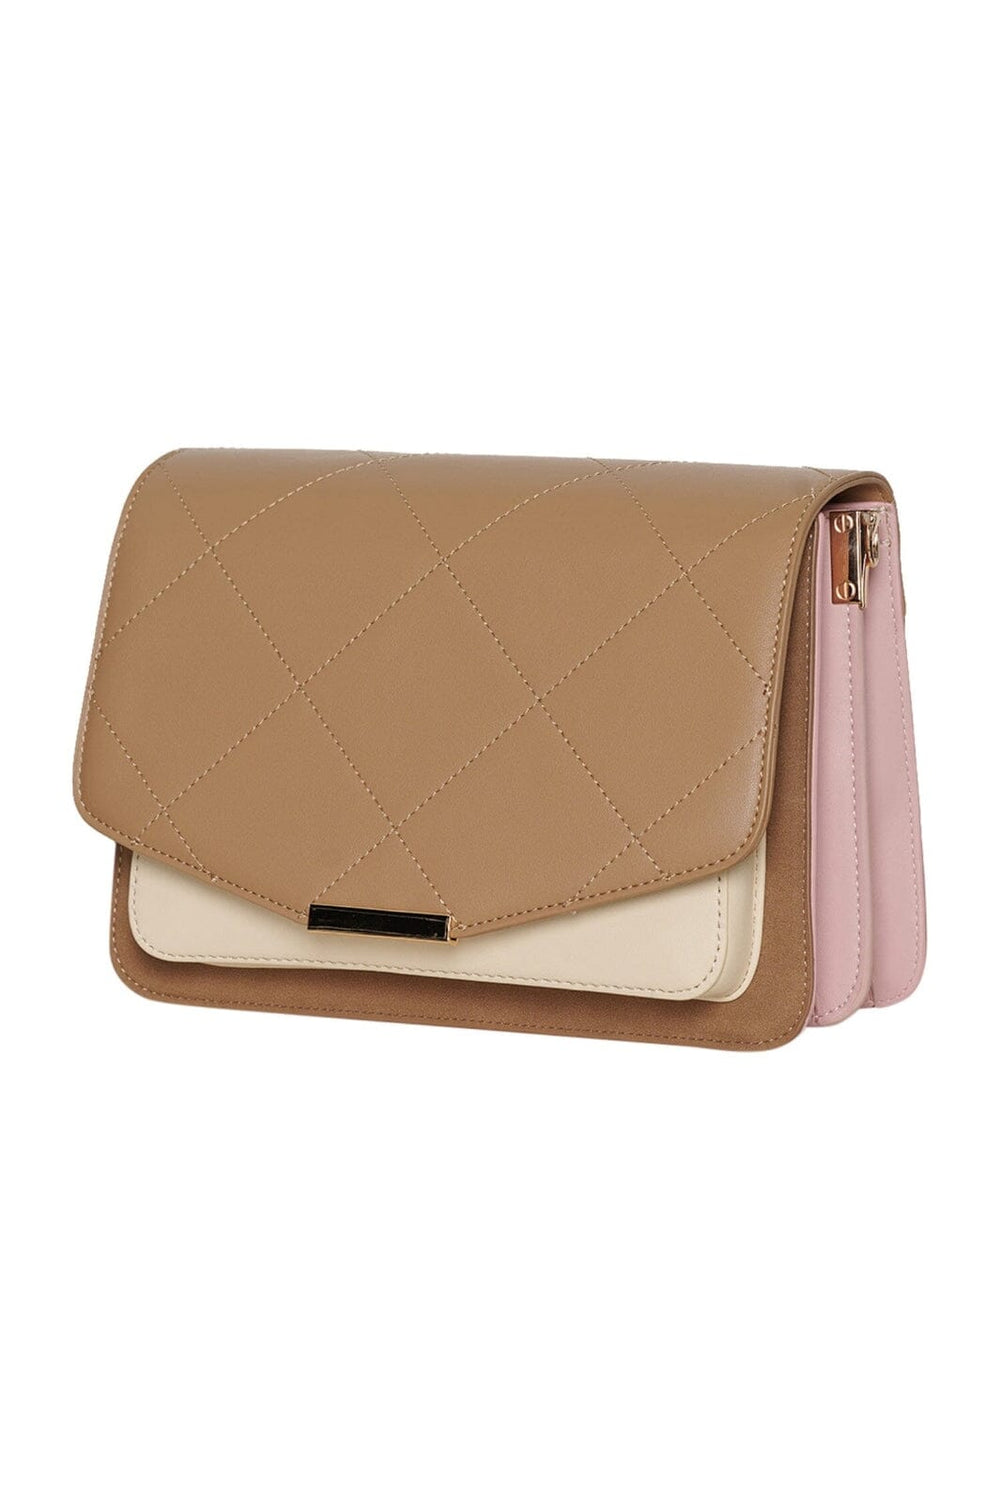 Noella - Blanca Multi Compartment Bag - 947 Taupe/Offwhite/Rose Mix Tasker 